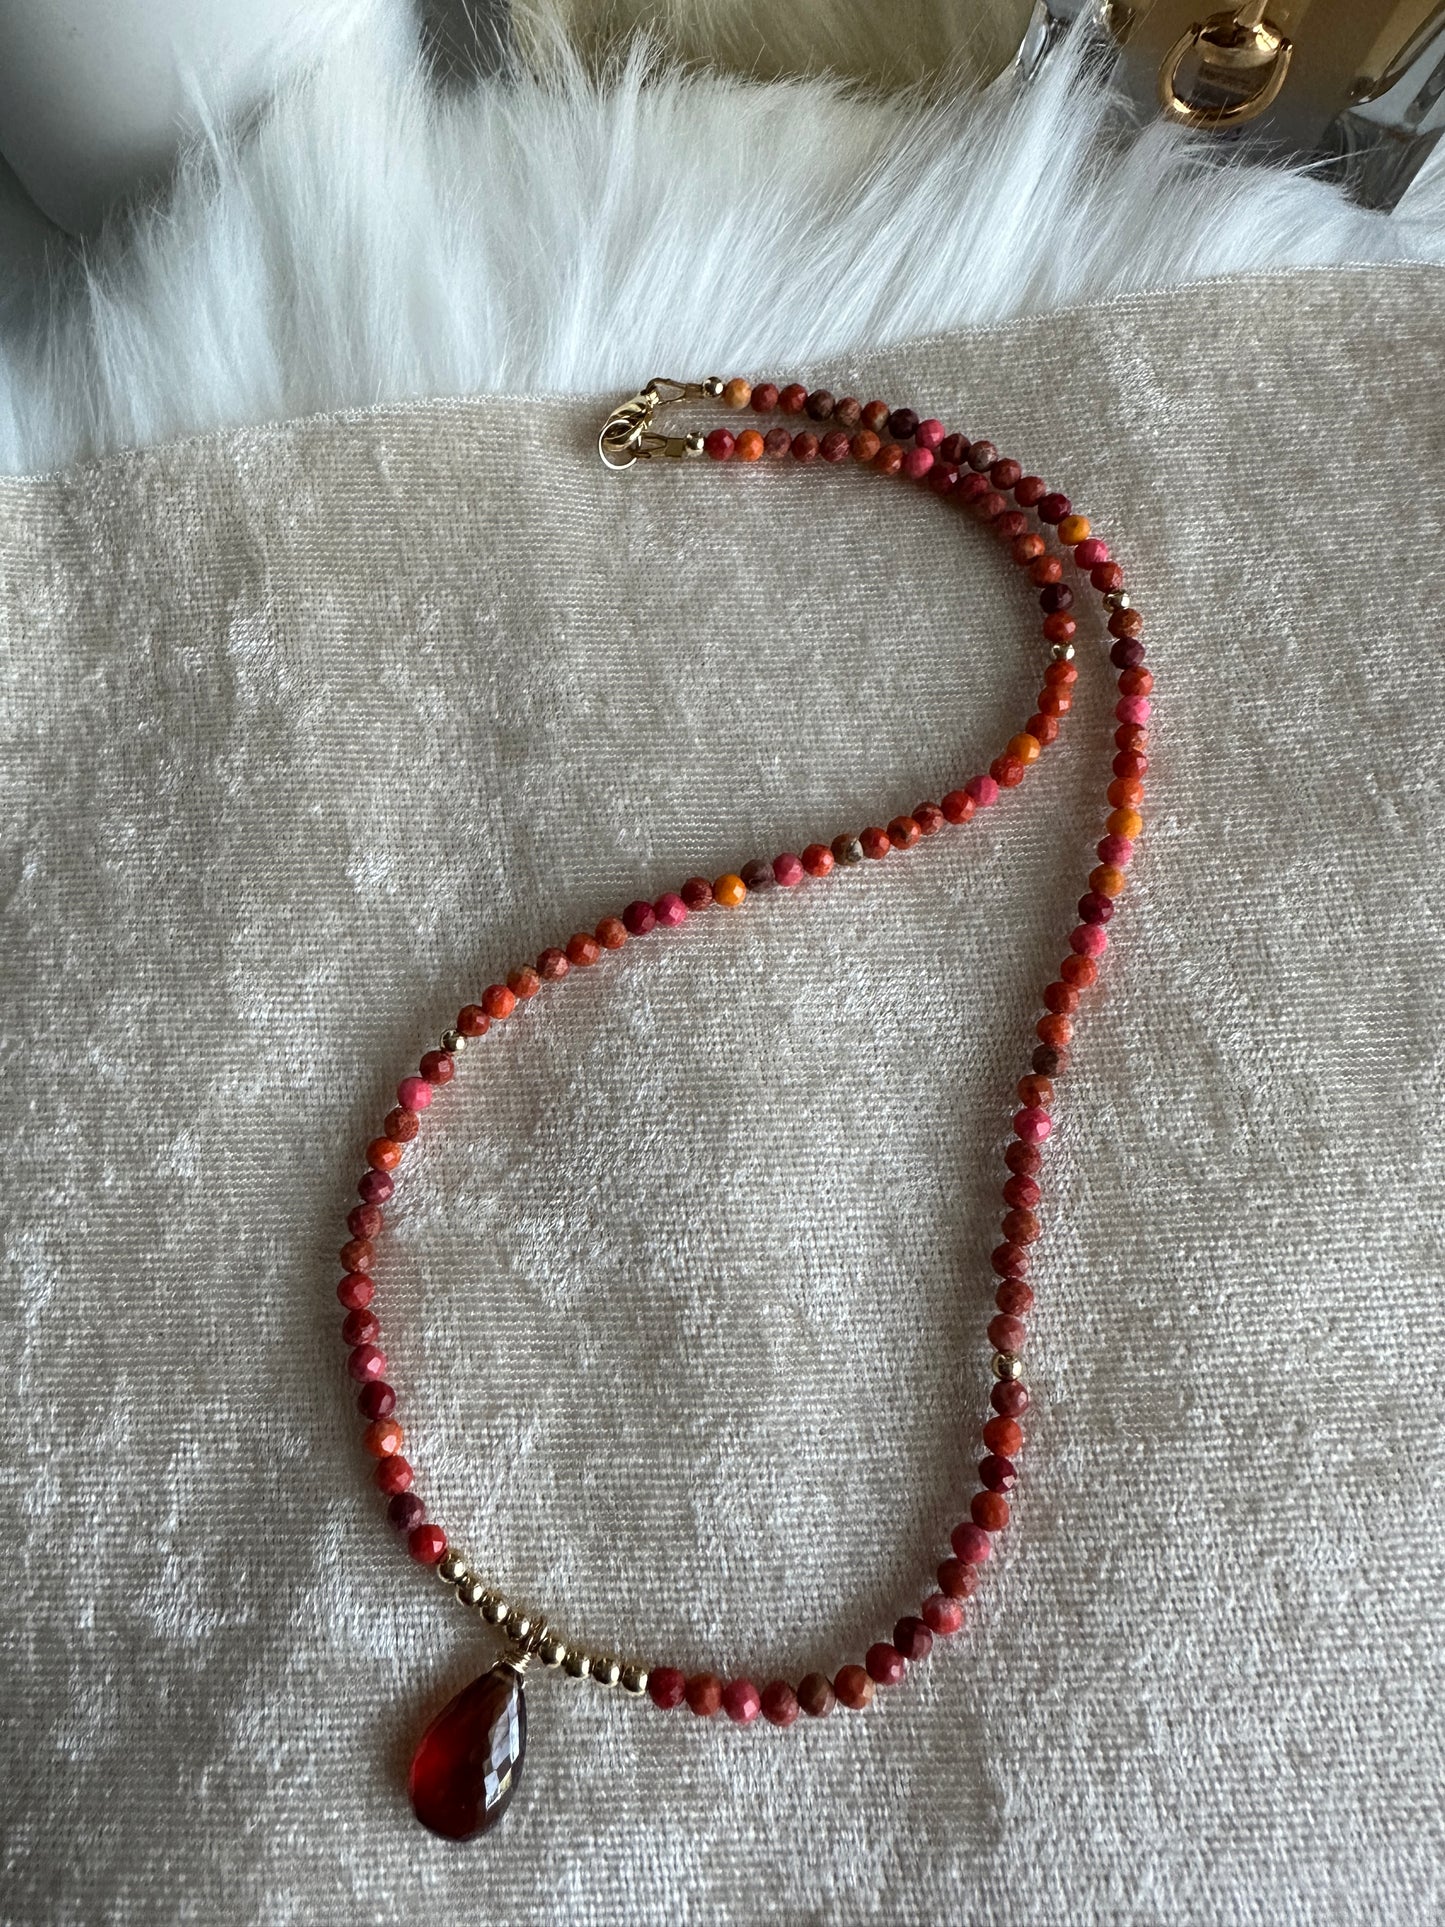 14kt Gold Filled Dainty Coral and Garnet Necklace